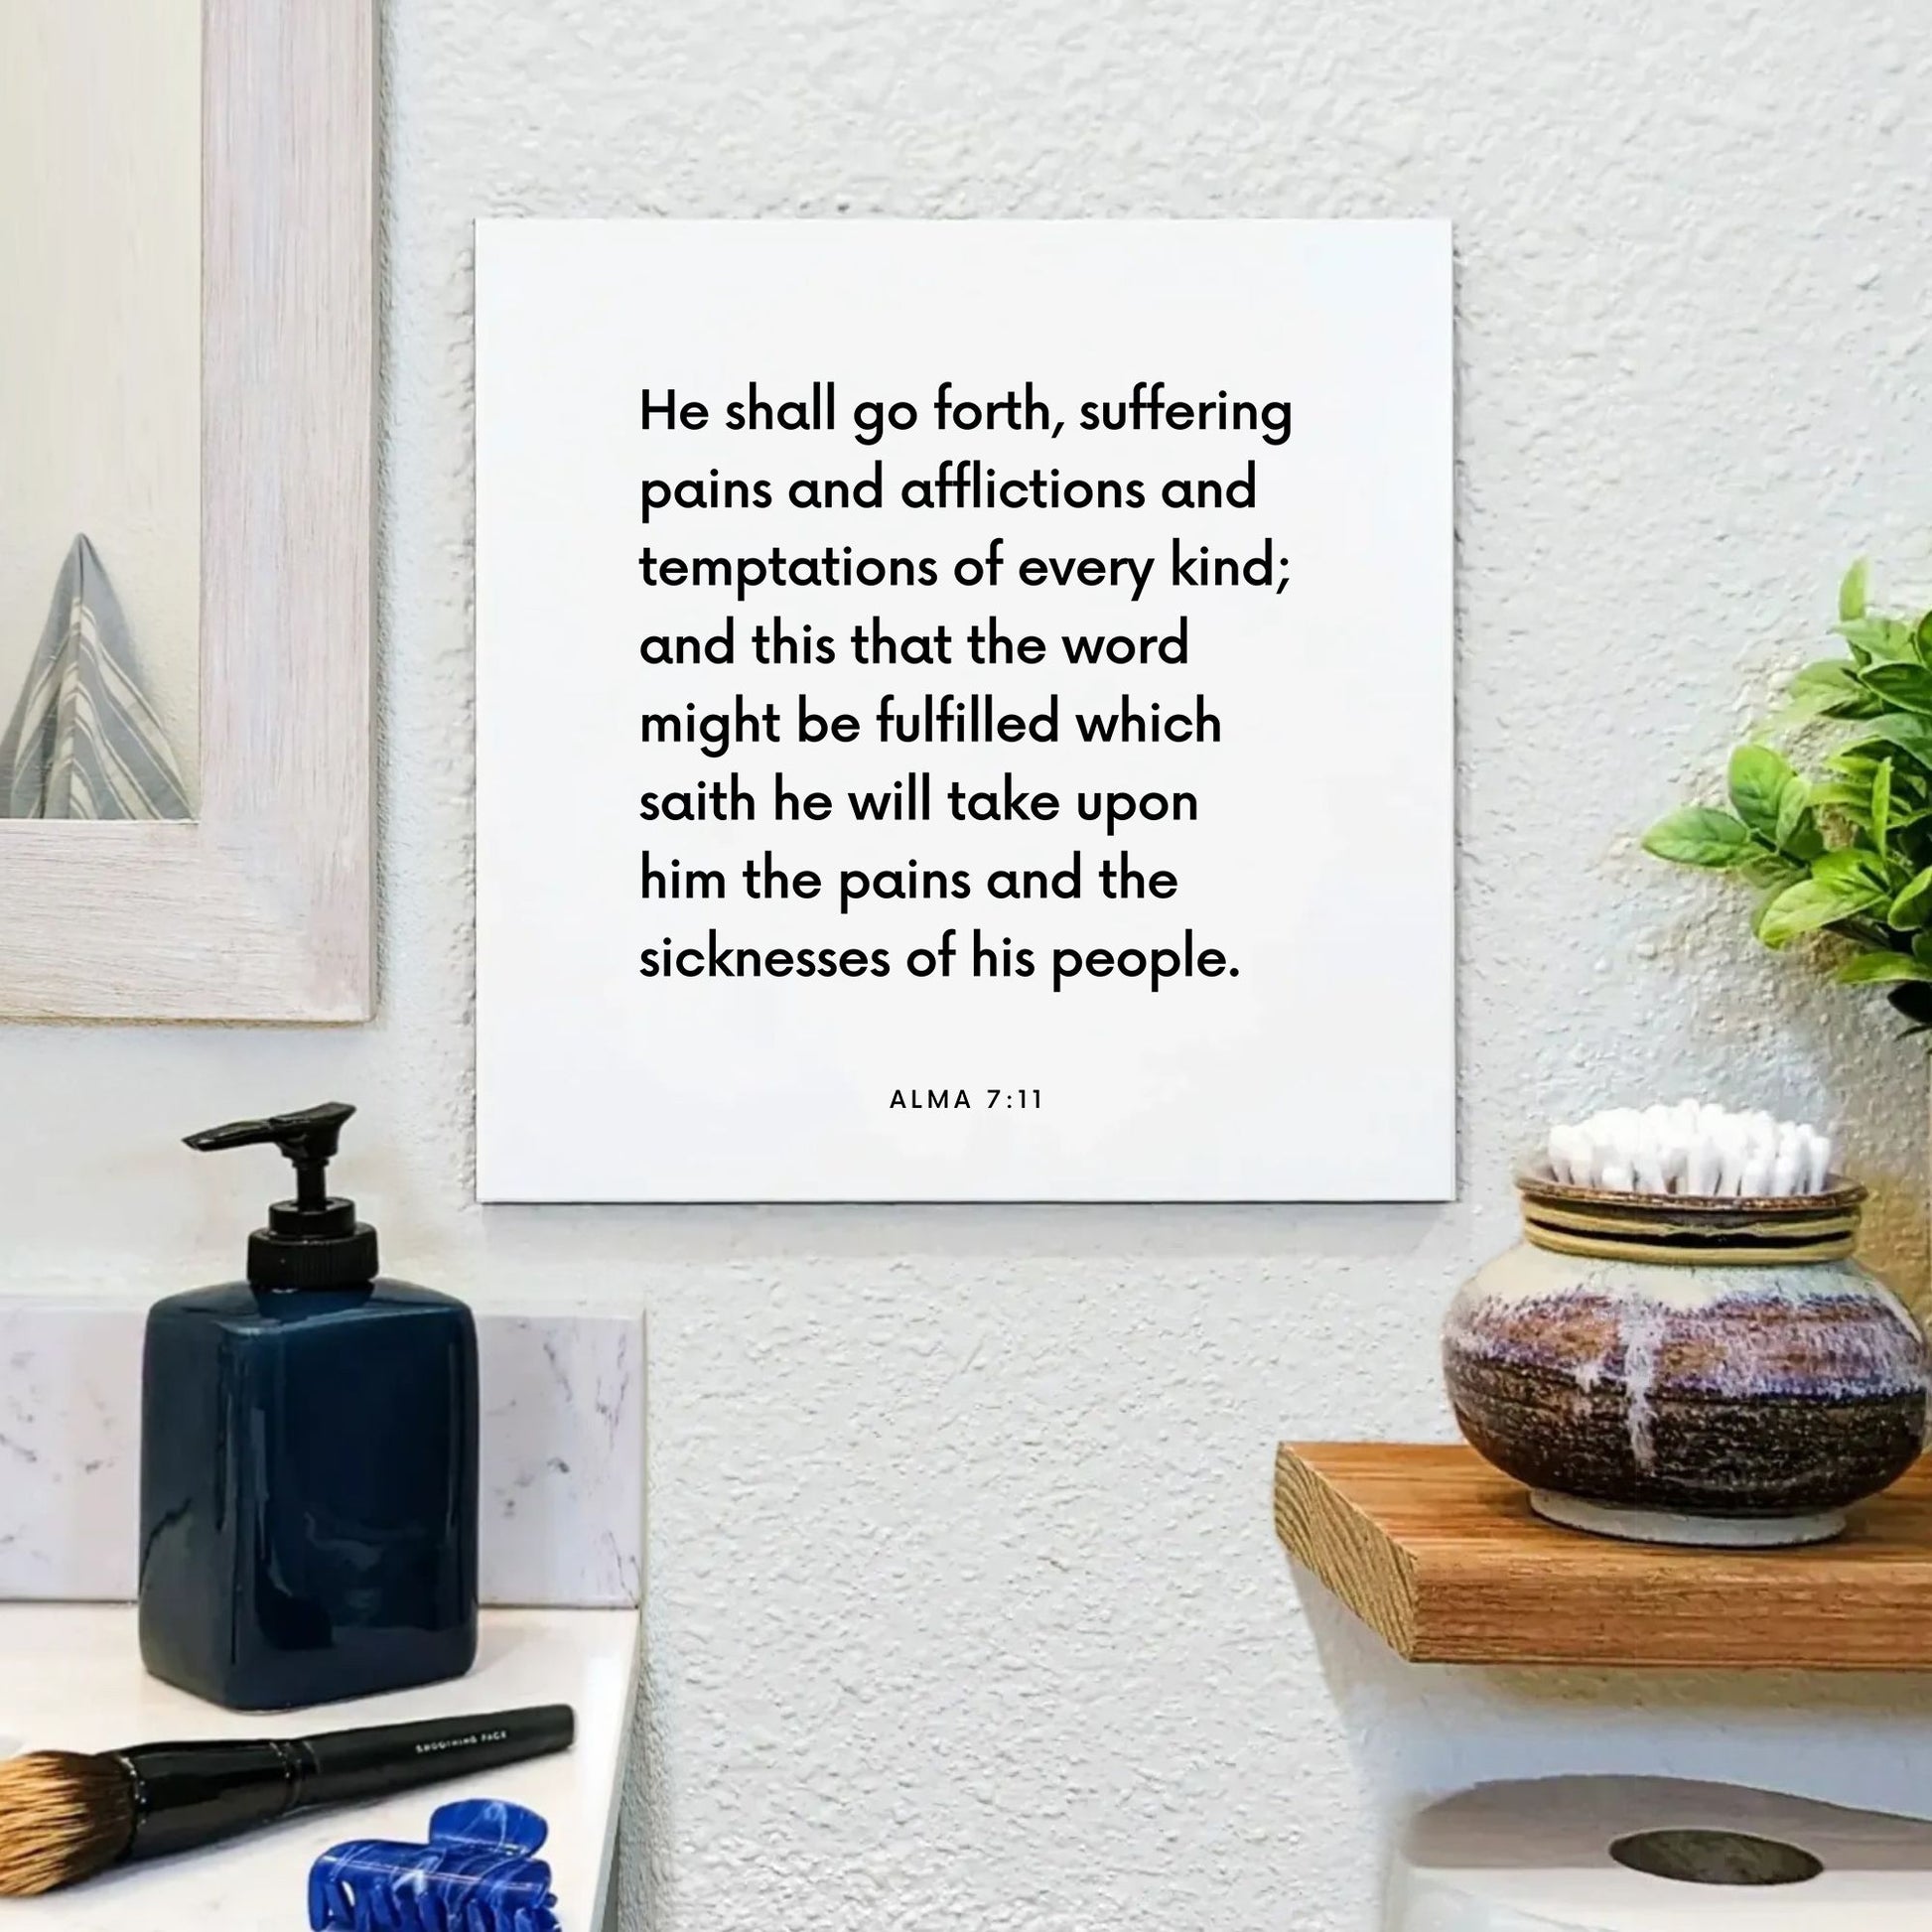 Bathroom mouting of the scripture tile for Alma 7:11 - "He will take upon him the pains and sicknesses of his people"